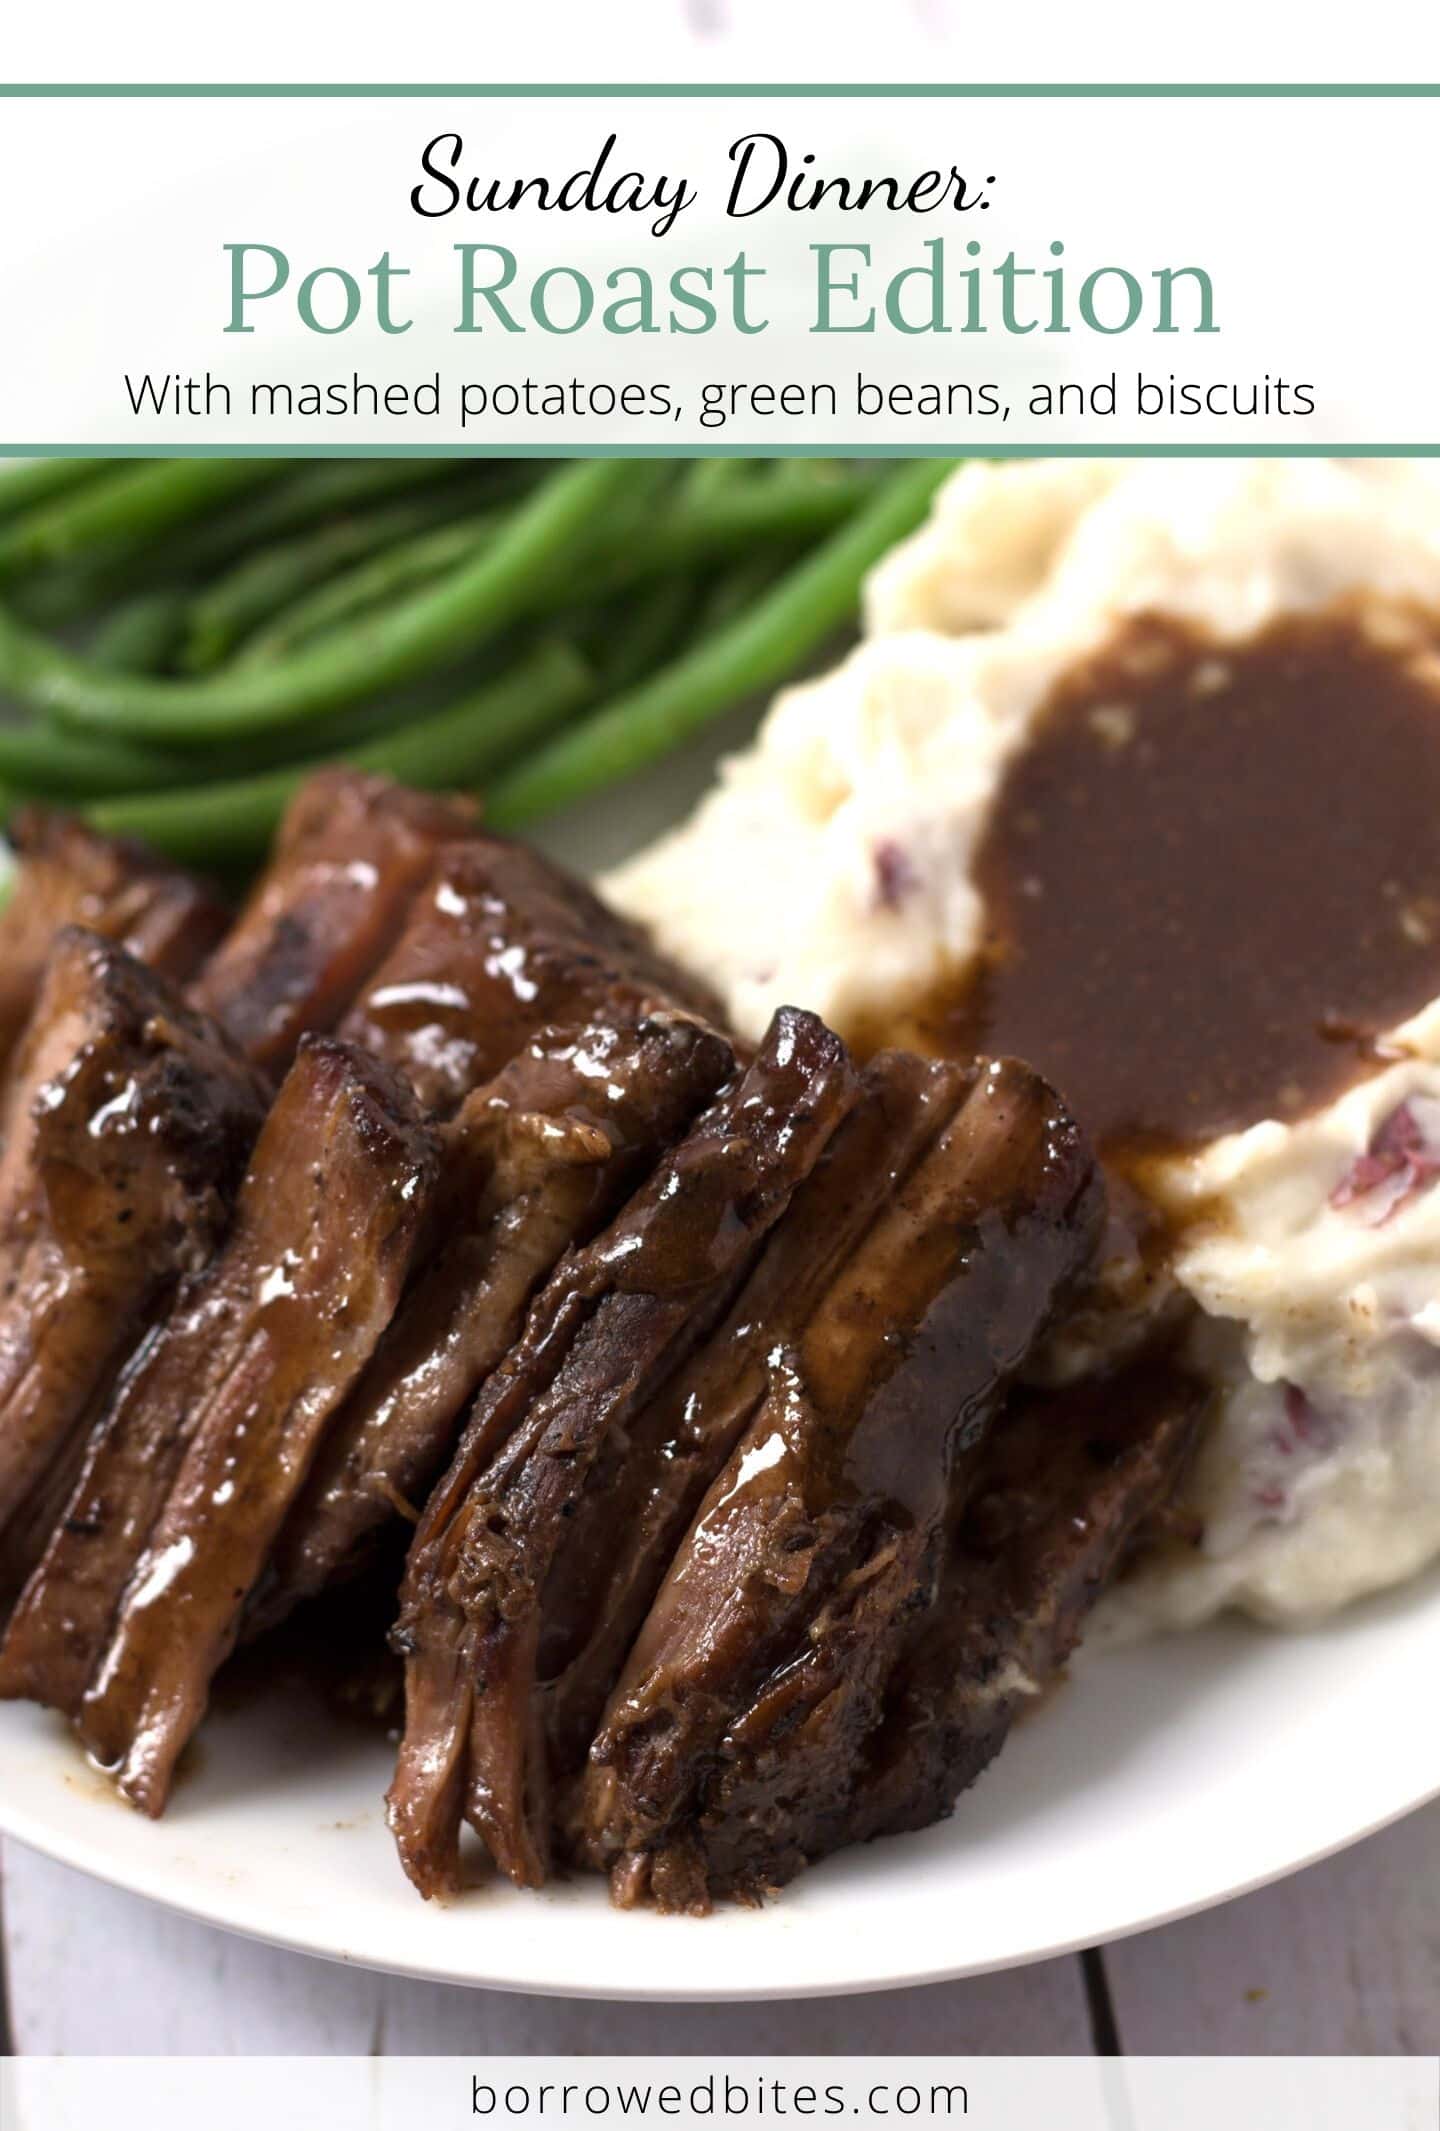 Pot Roast, mashed potatoes, and green beans on a plate with text overlay